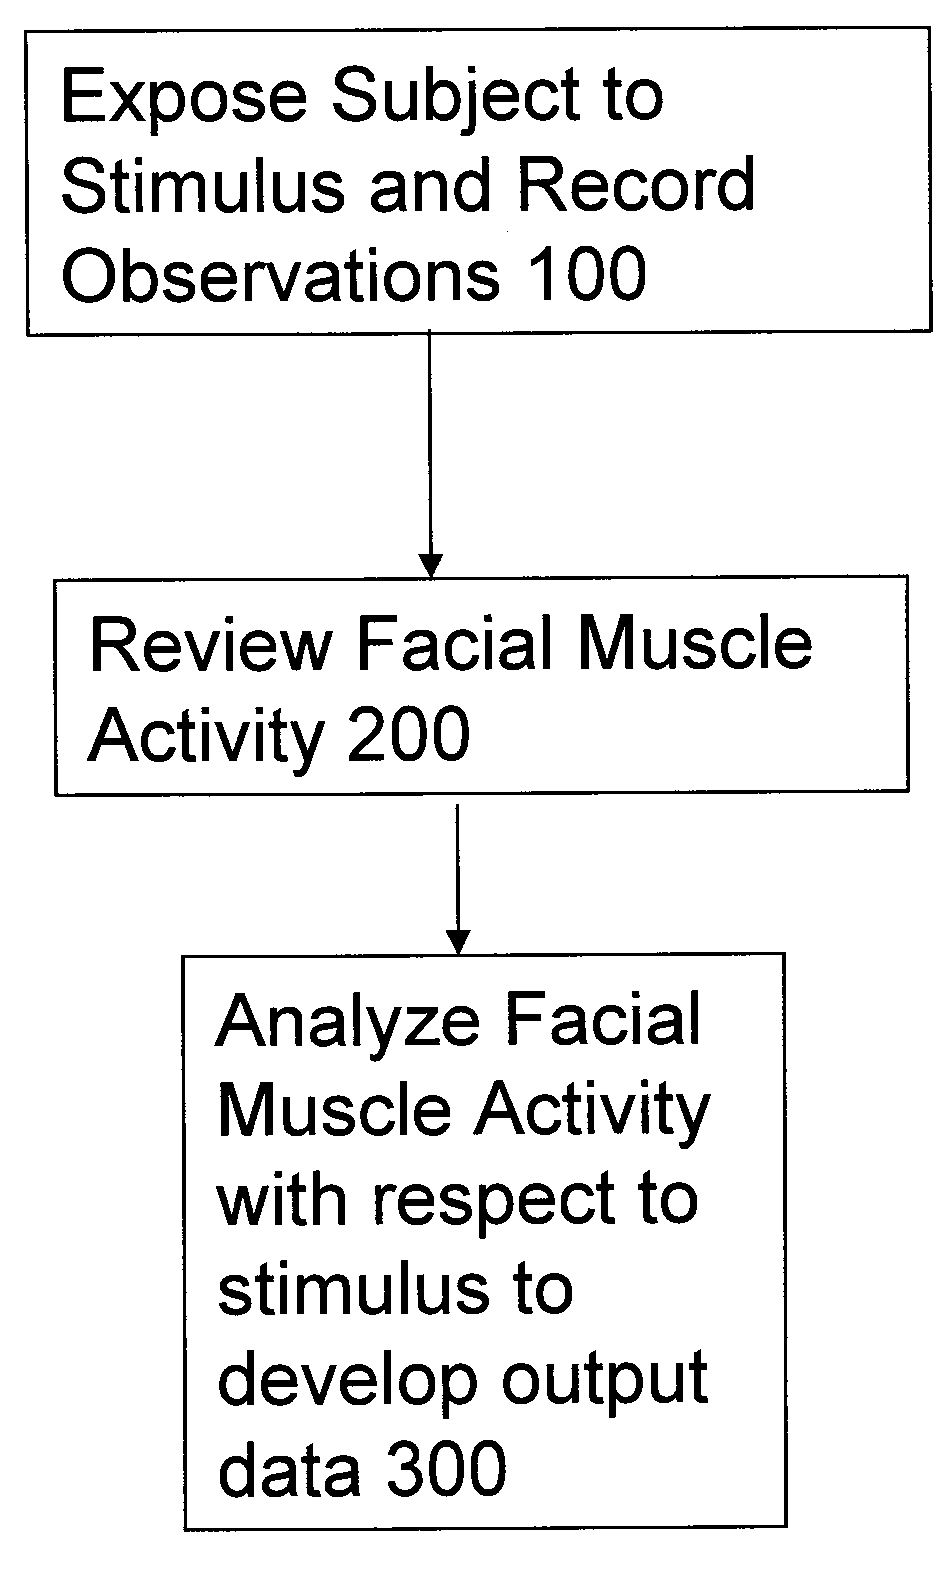 Method of assessing people's self-presentation and actions to evaluate personality type, behavioral tendencies, credibility, motivations and other insights through facial muscle activity and expressions